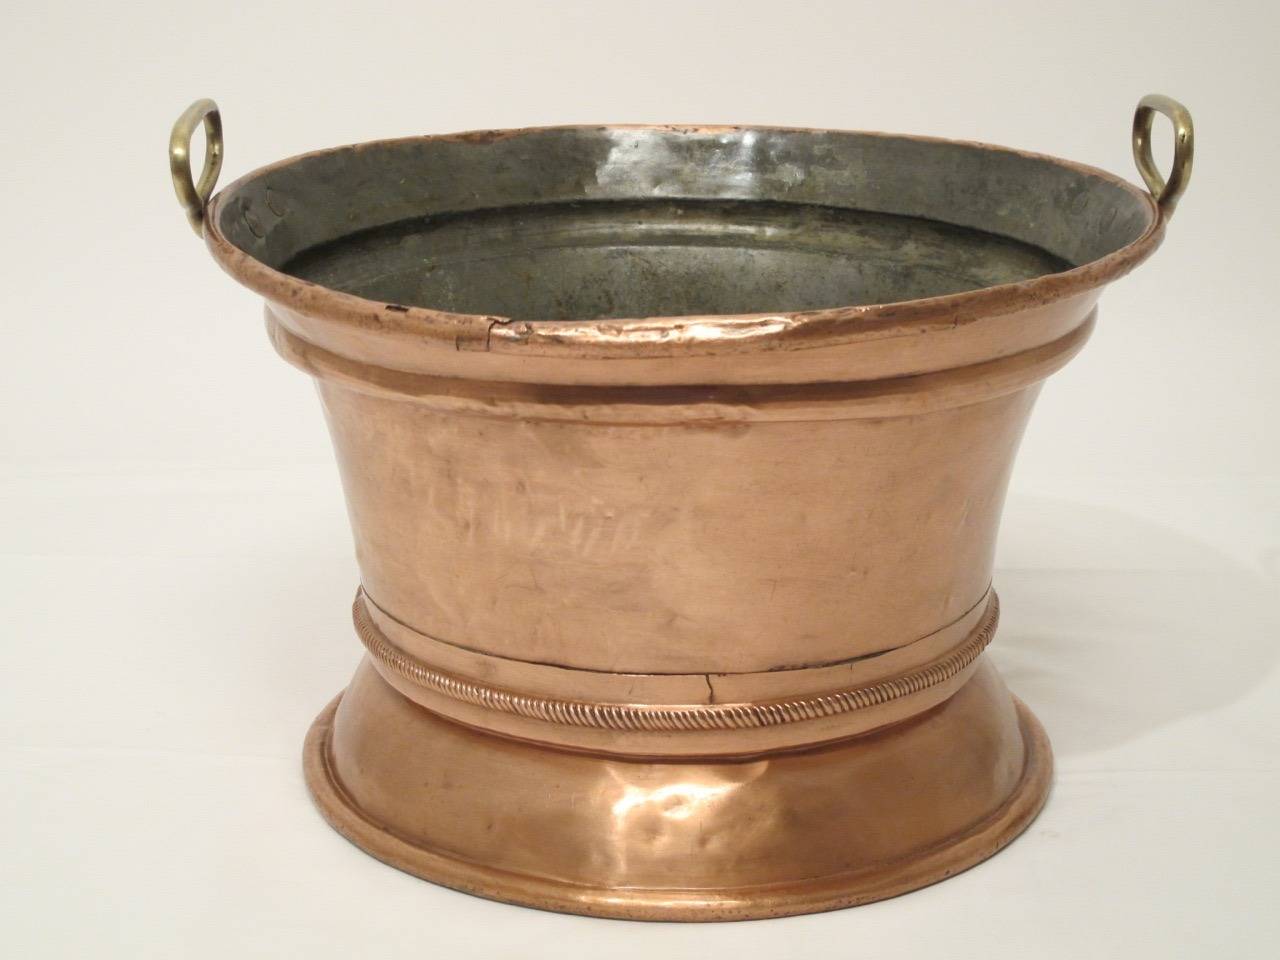 A large round copper pot with brass handles. Italian, circa mid-19th century.